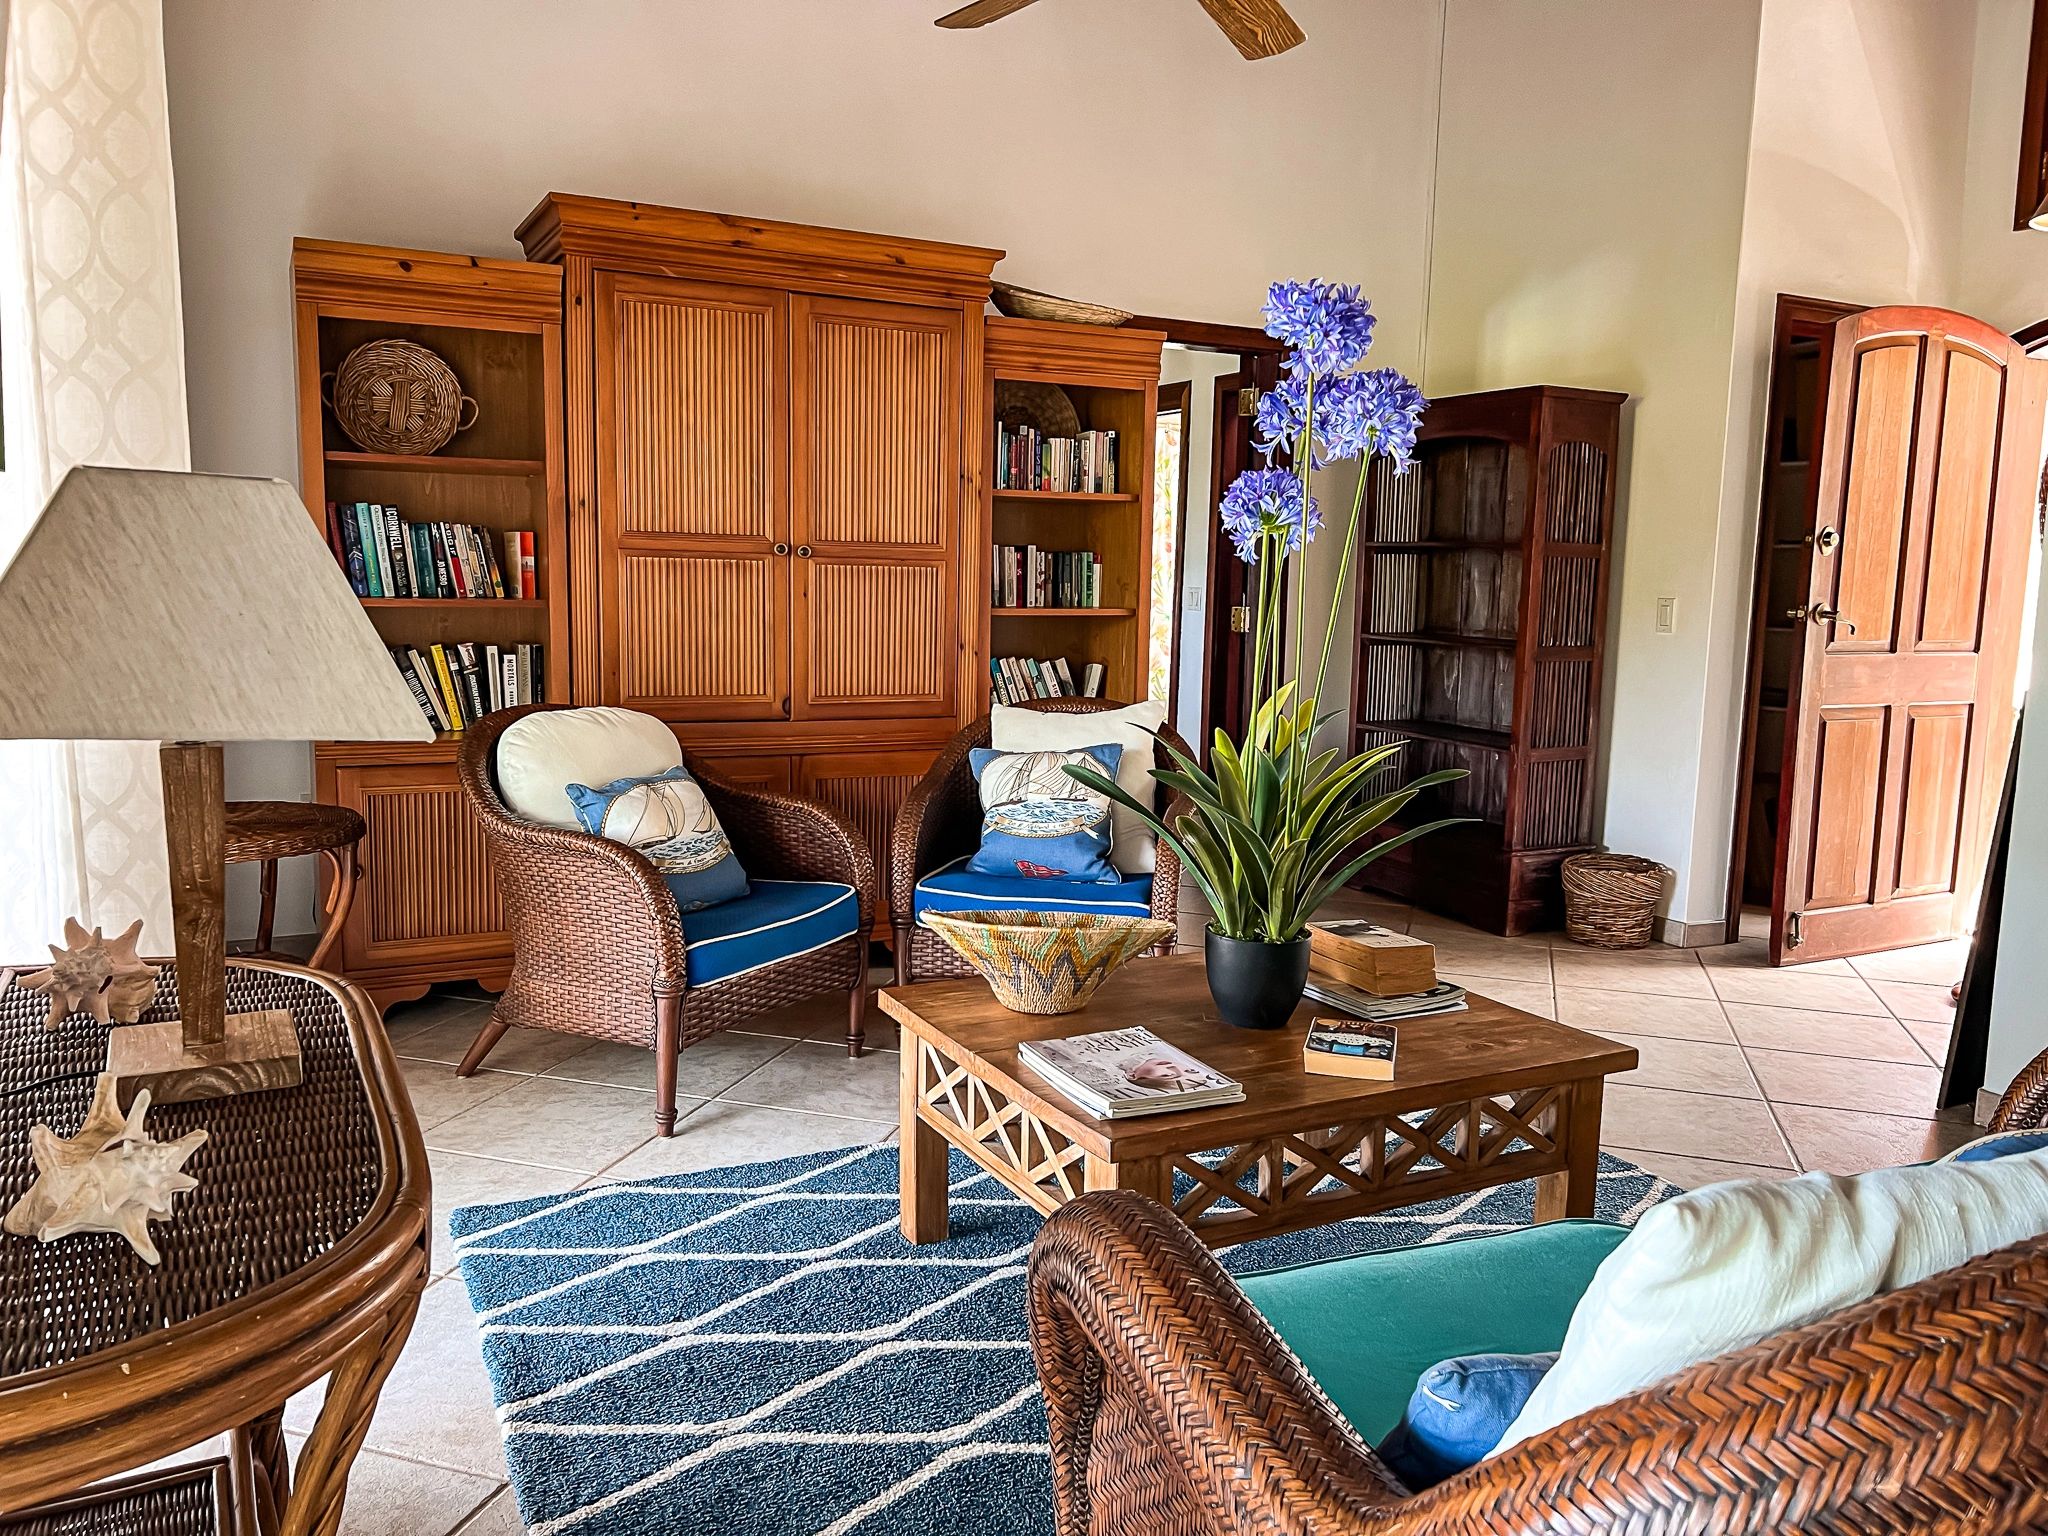 Sitting room with sofas and chairs and plenty of books to choose from.